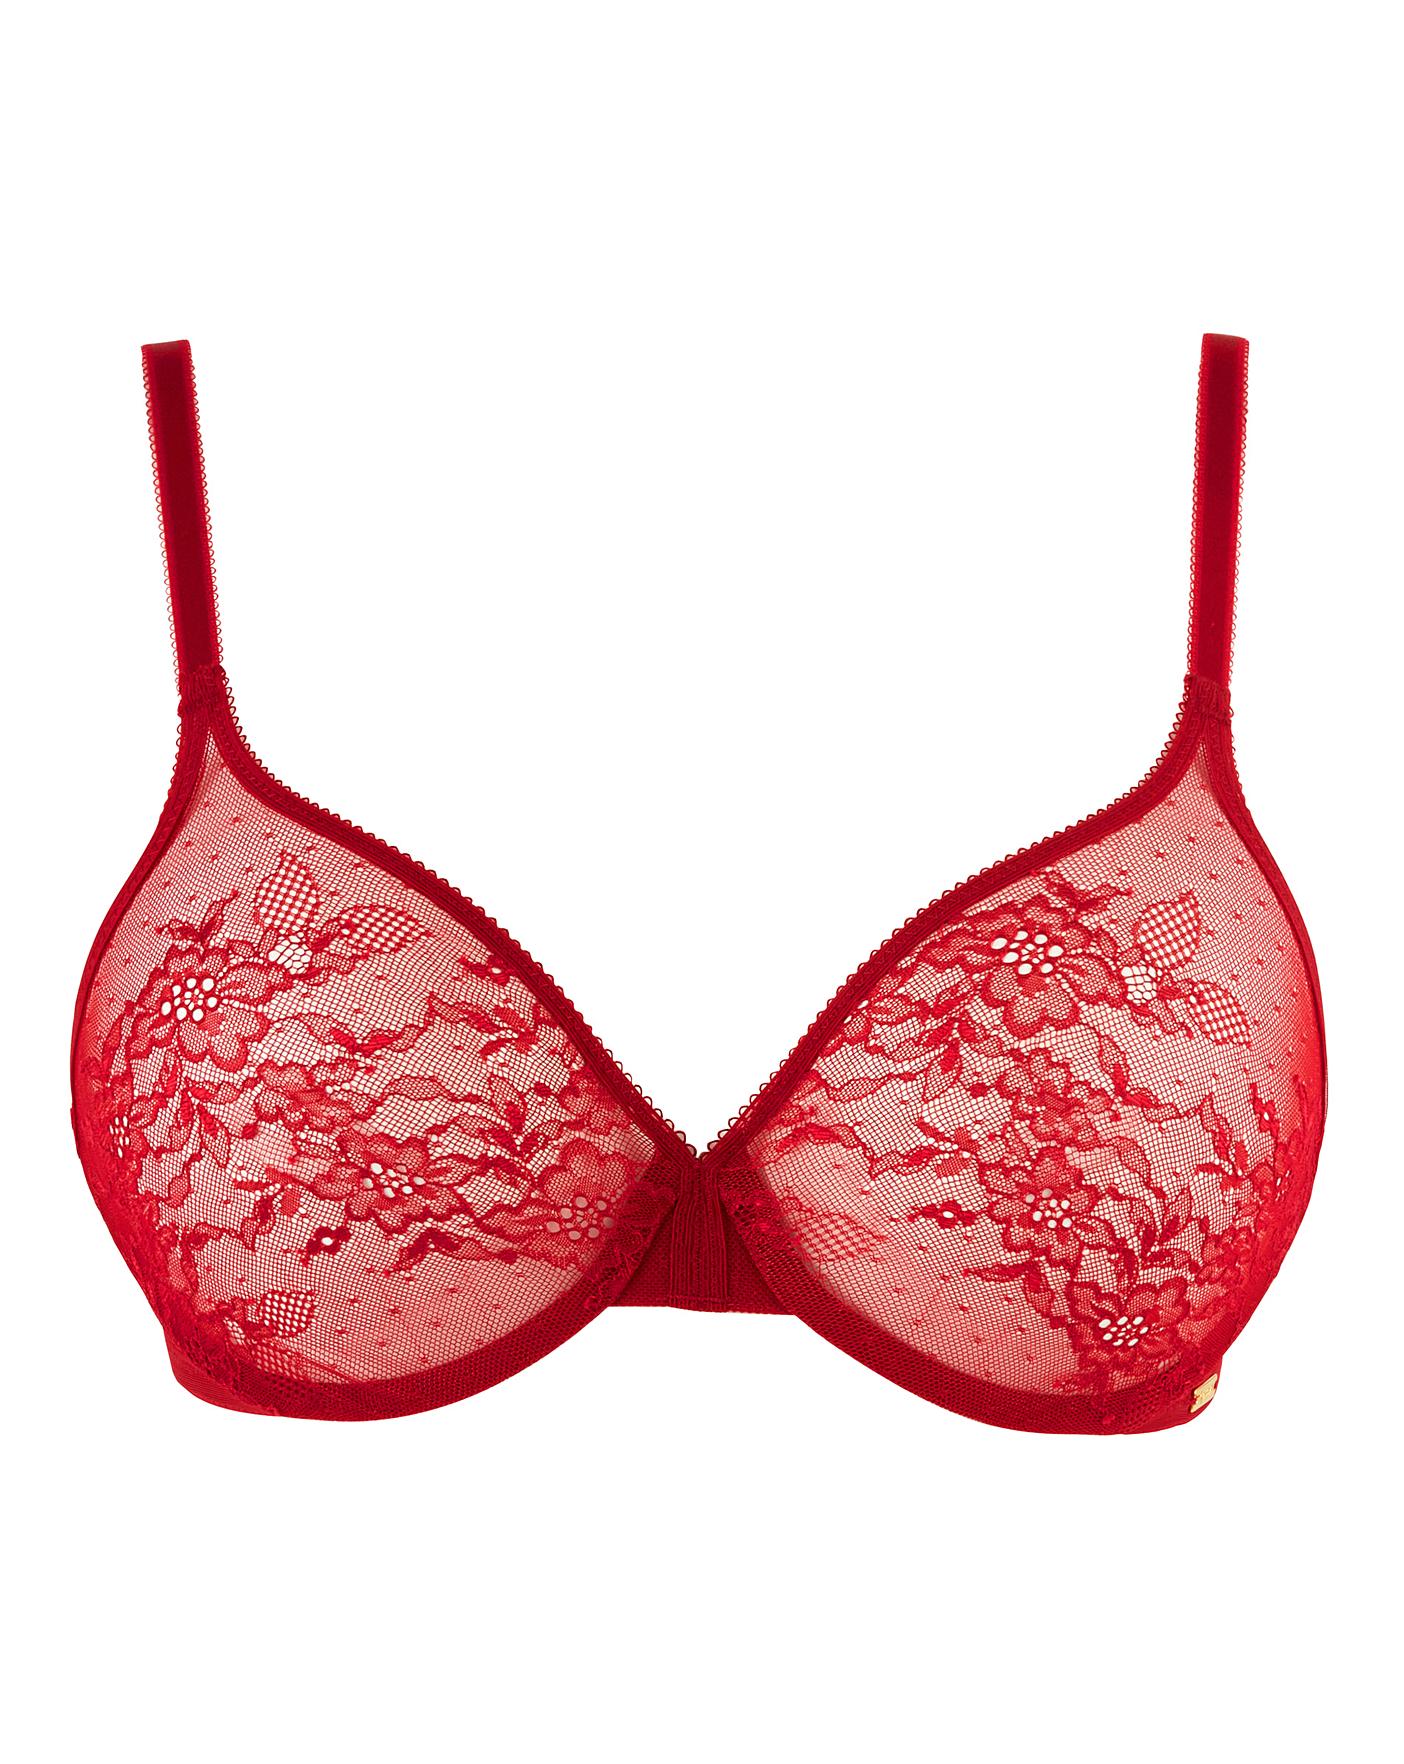 Gossard Glossies Lace Sheer Thong In Bordeaux Red for Women